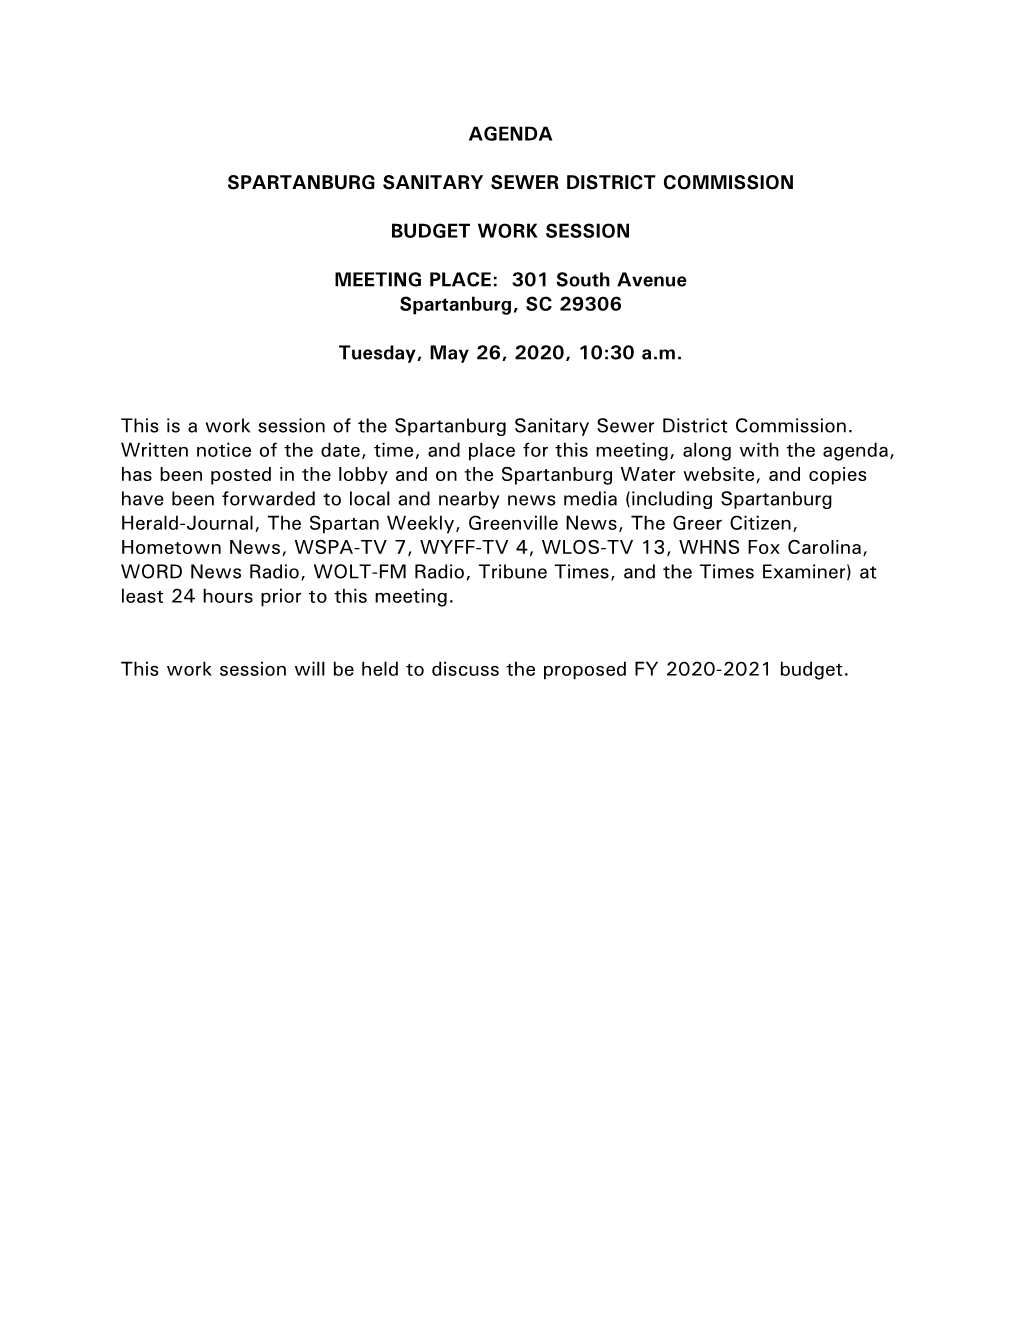 Agenda Spartanburg Sanitary Sewer District Commission